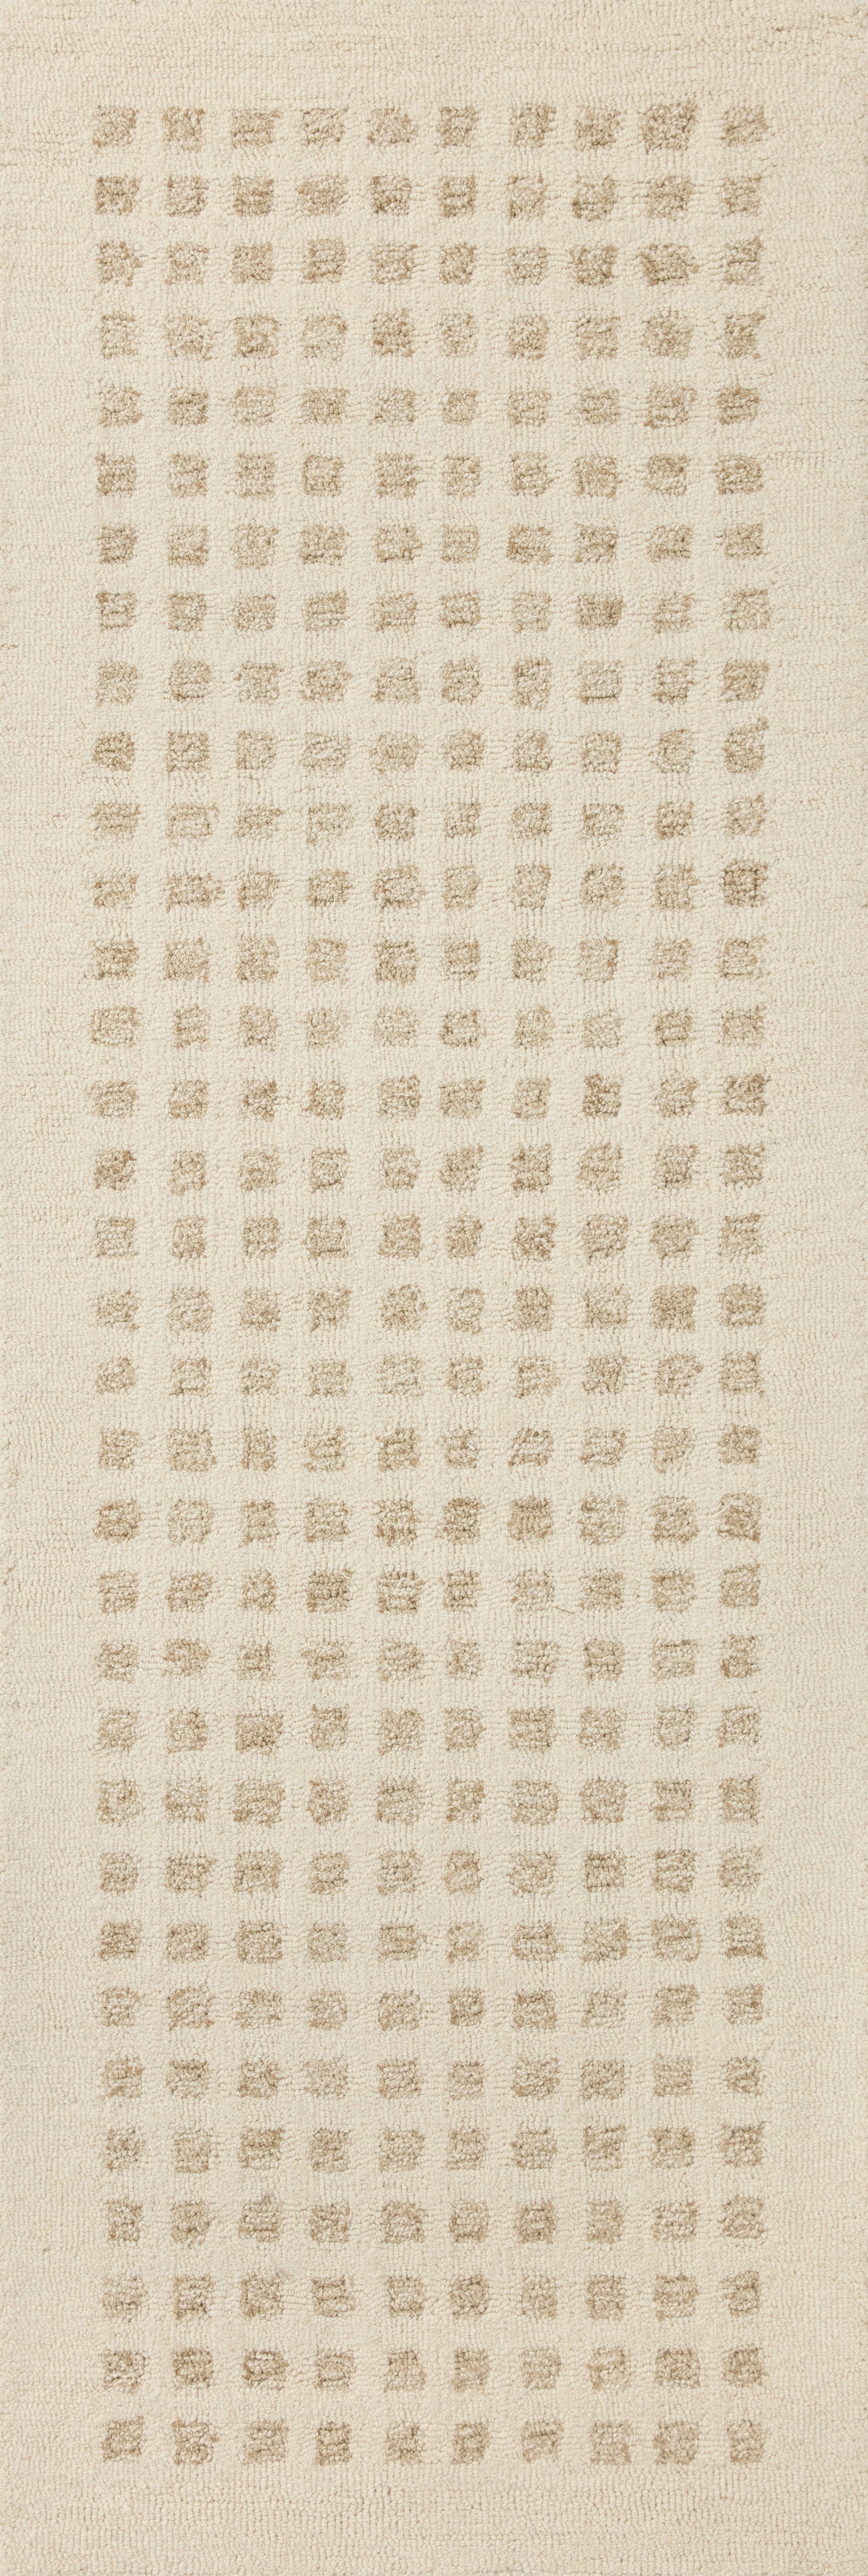 CJ Ivory / Natural - Polly Collection Rug